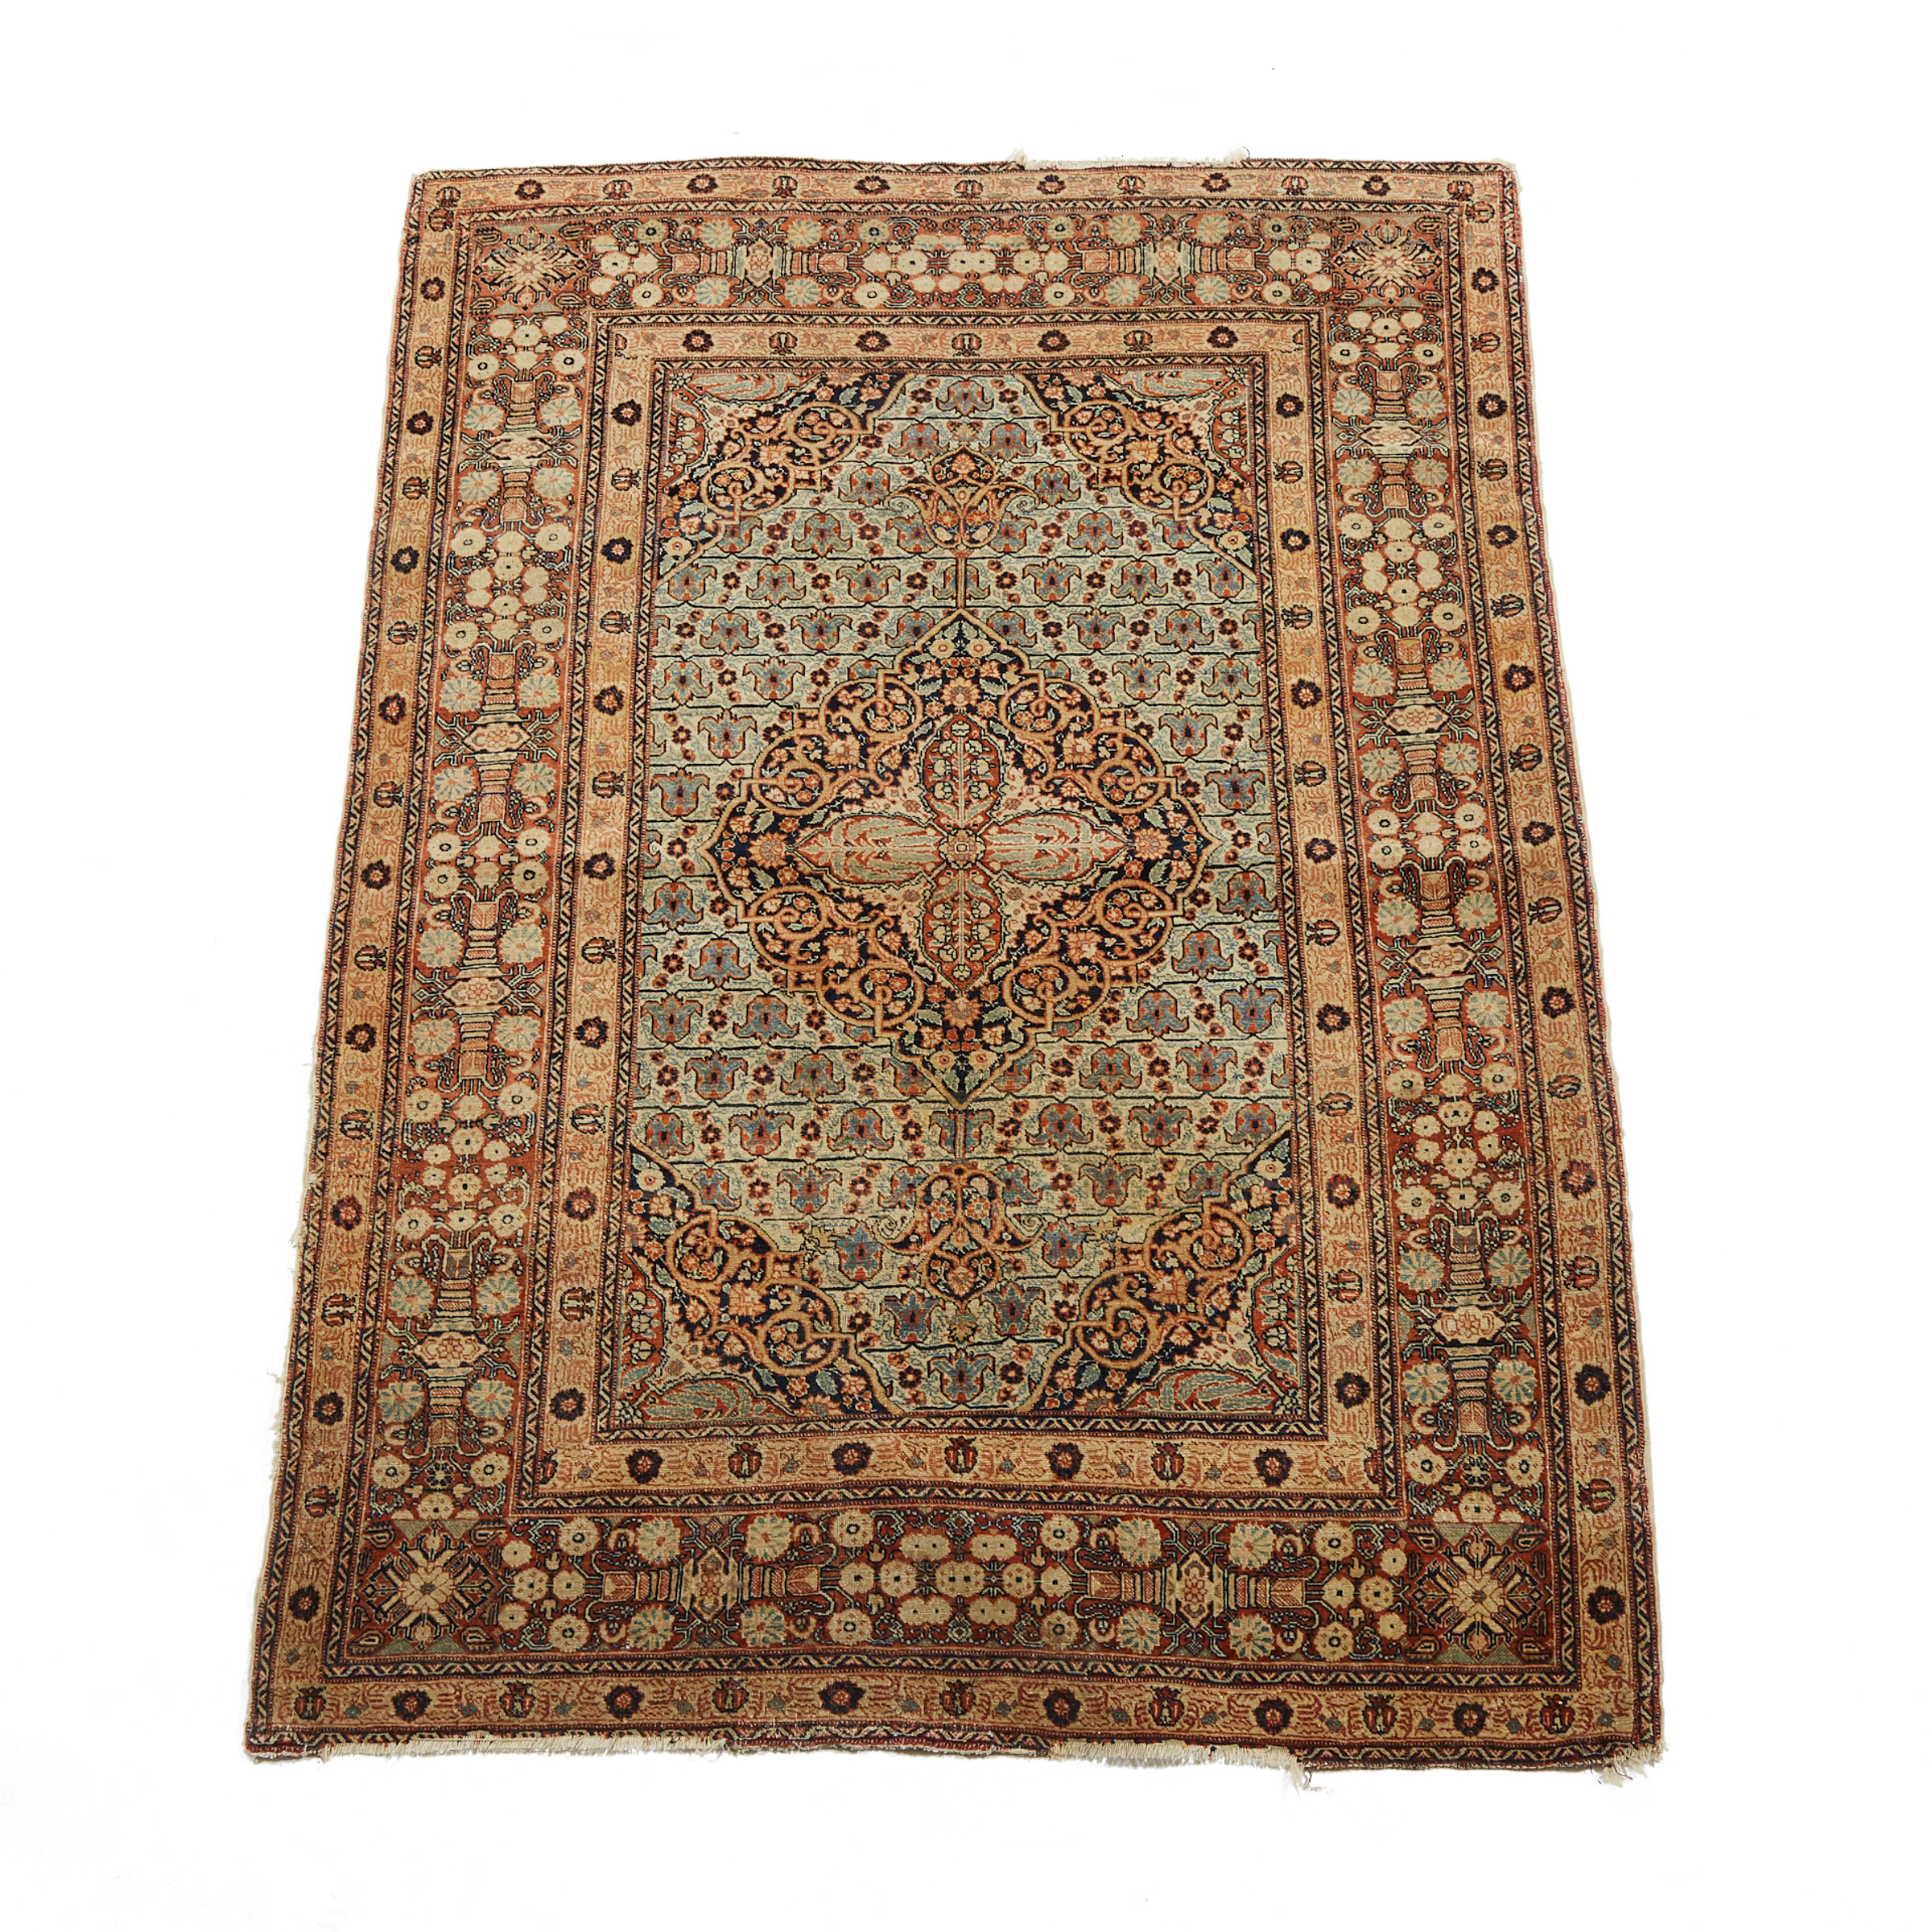 Feraghan Rug, Persian, early 20th century